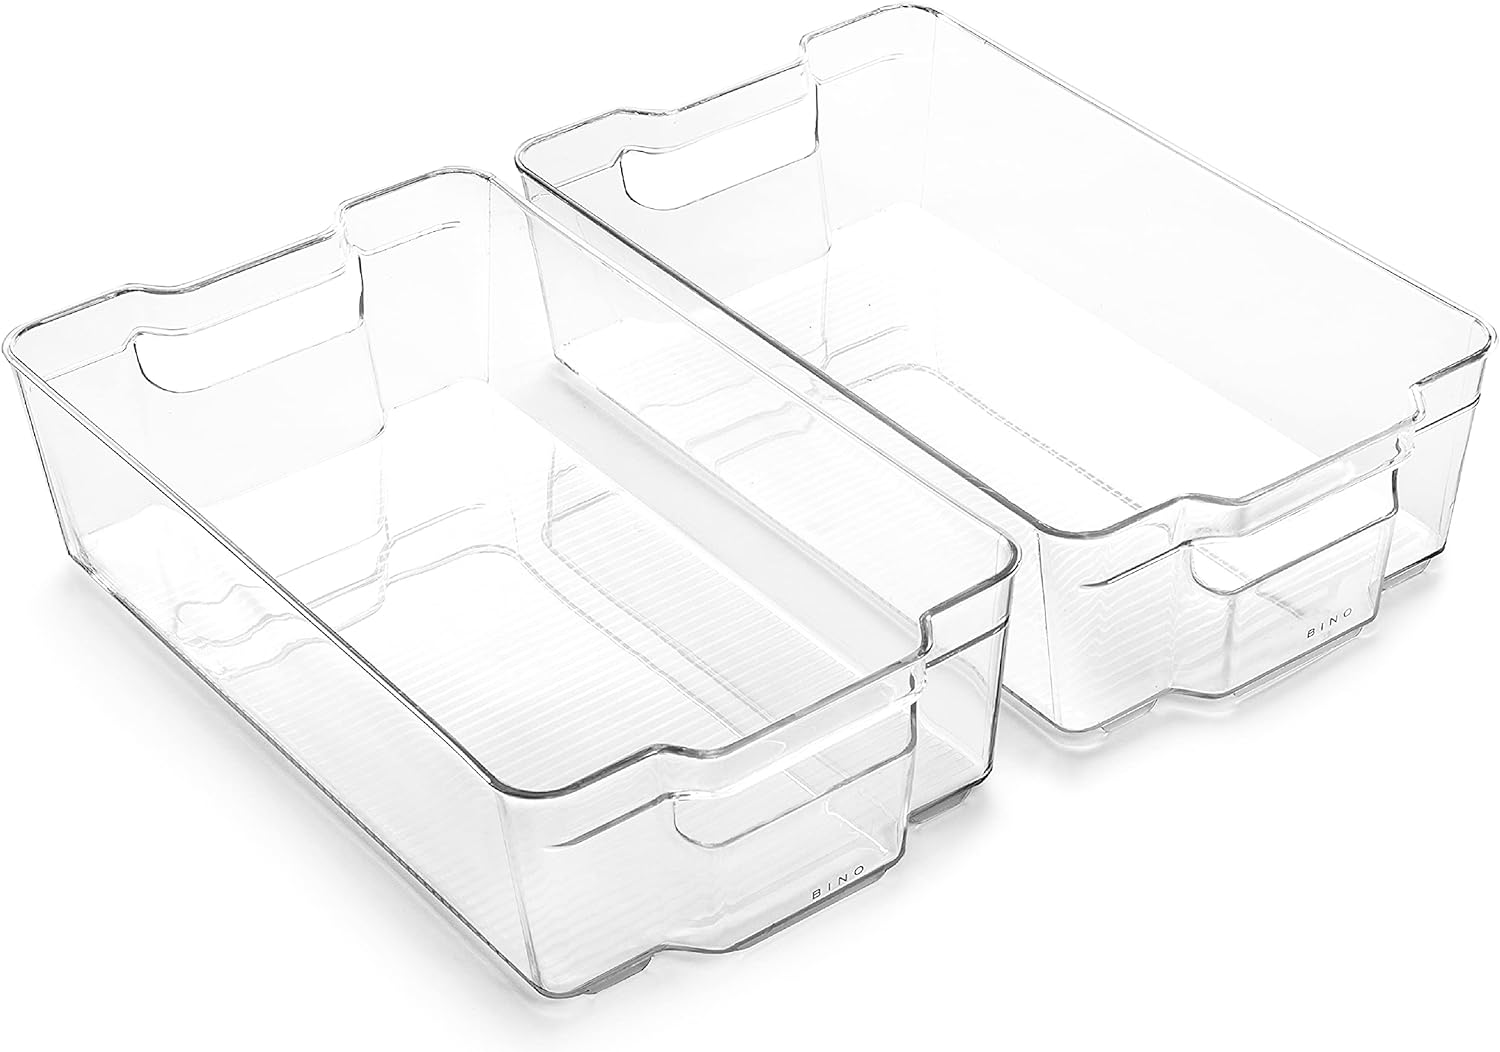 BINO | Stackable Storage Bins, X-Large - 2 Pack | THE STACKER COLLECTION | Clear Plastic | Built-In Handle | BPA-Free | Containers for Organizing Kitchen Pantry | Multi-Use Organizer